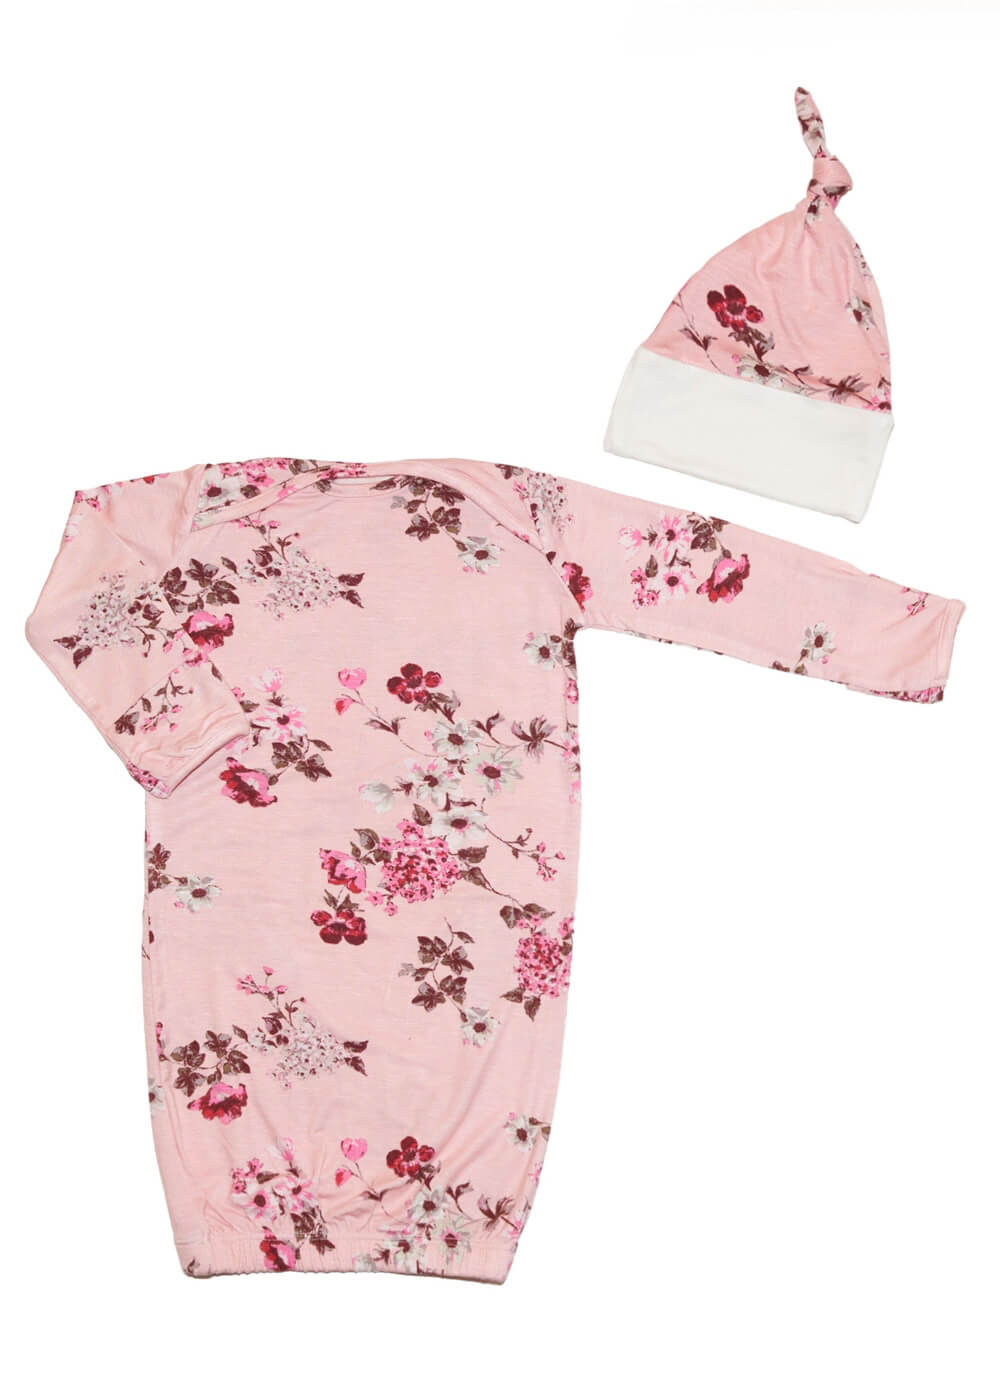 Analise Mommy & Me PJ Gift Set in Pink Blossom by Everly Grey 